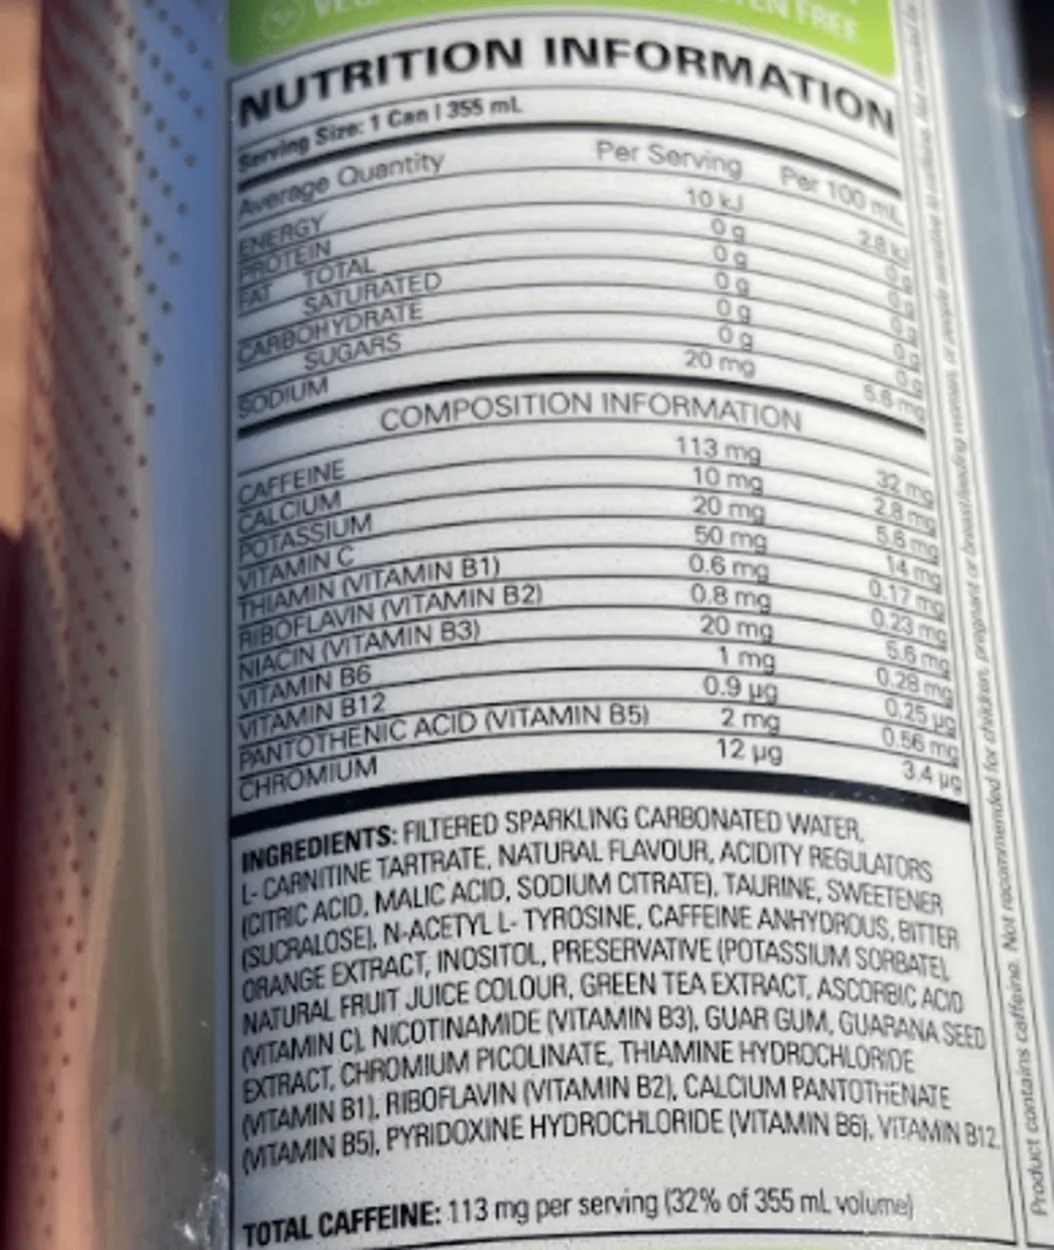 Nutrition facts of OxyShred Energy Drink.